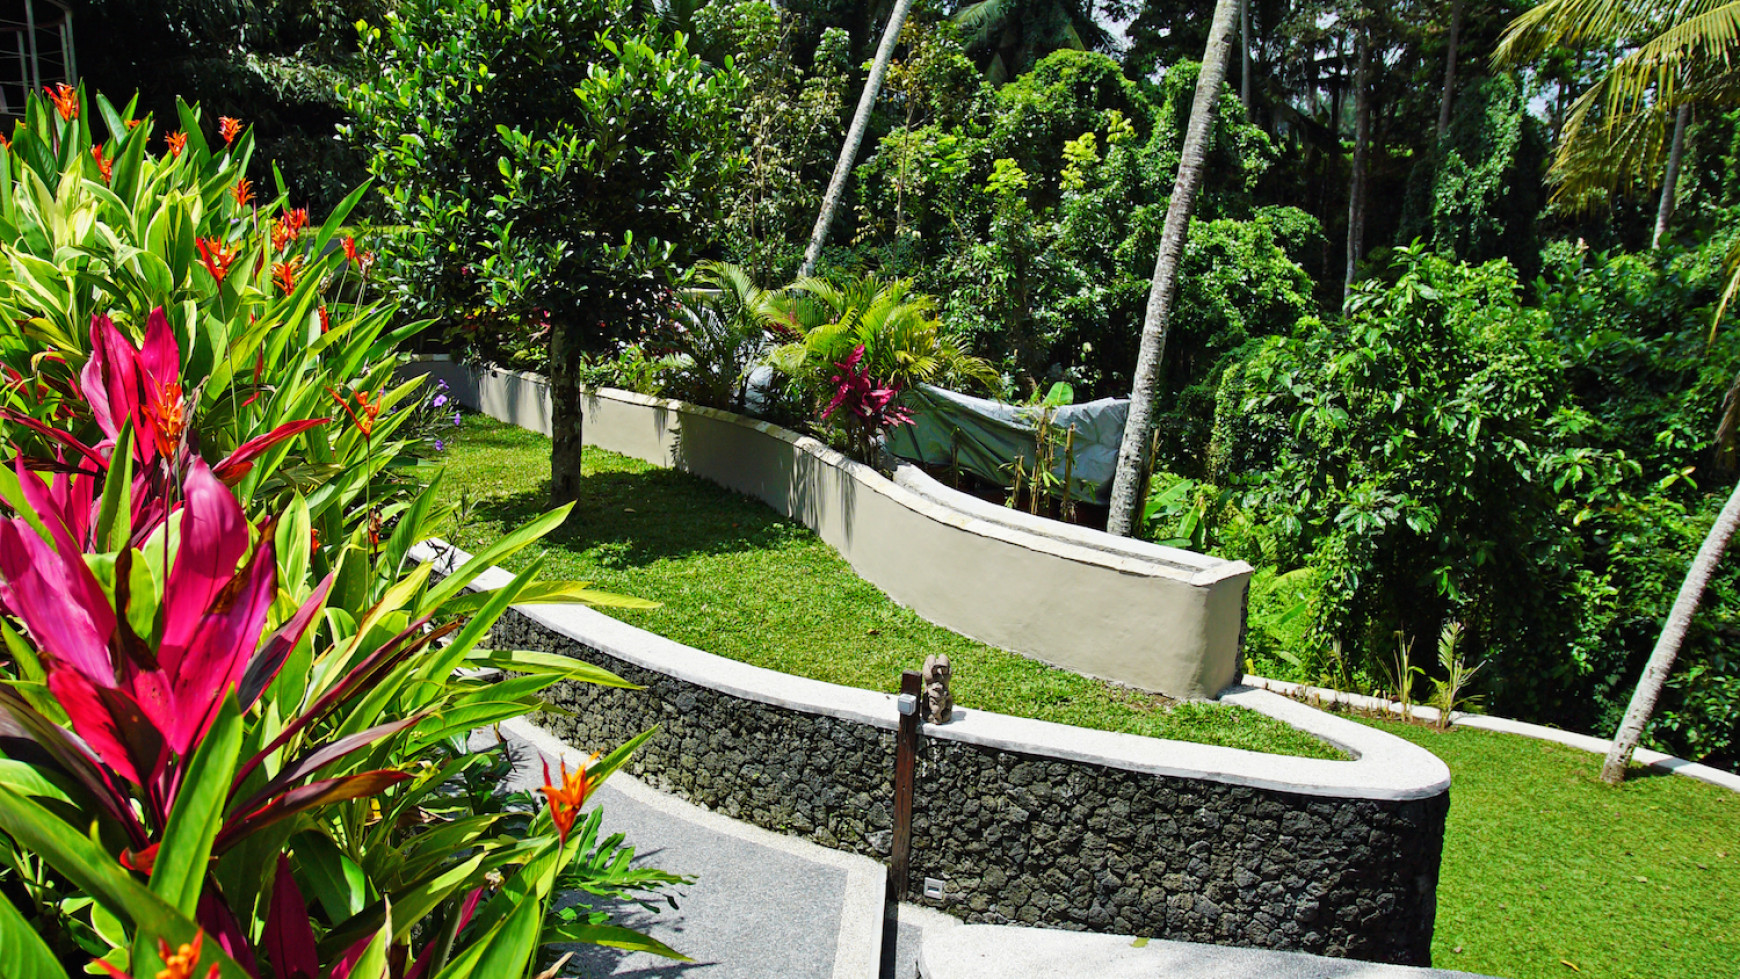 Amazing 3 Bedroom Villa on 1200 sq m of Leasehold Land with Ravine View 10 Minutes from Ubud Center